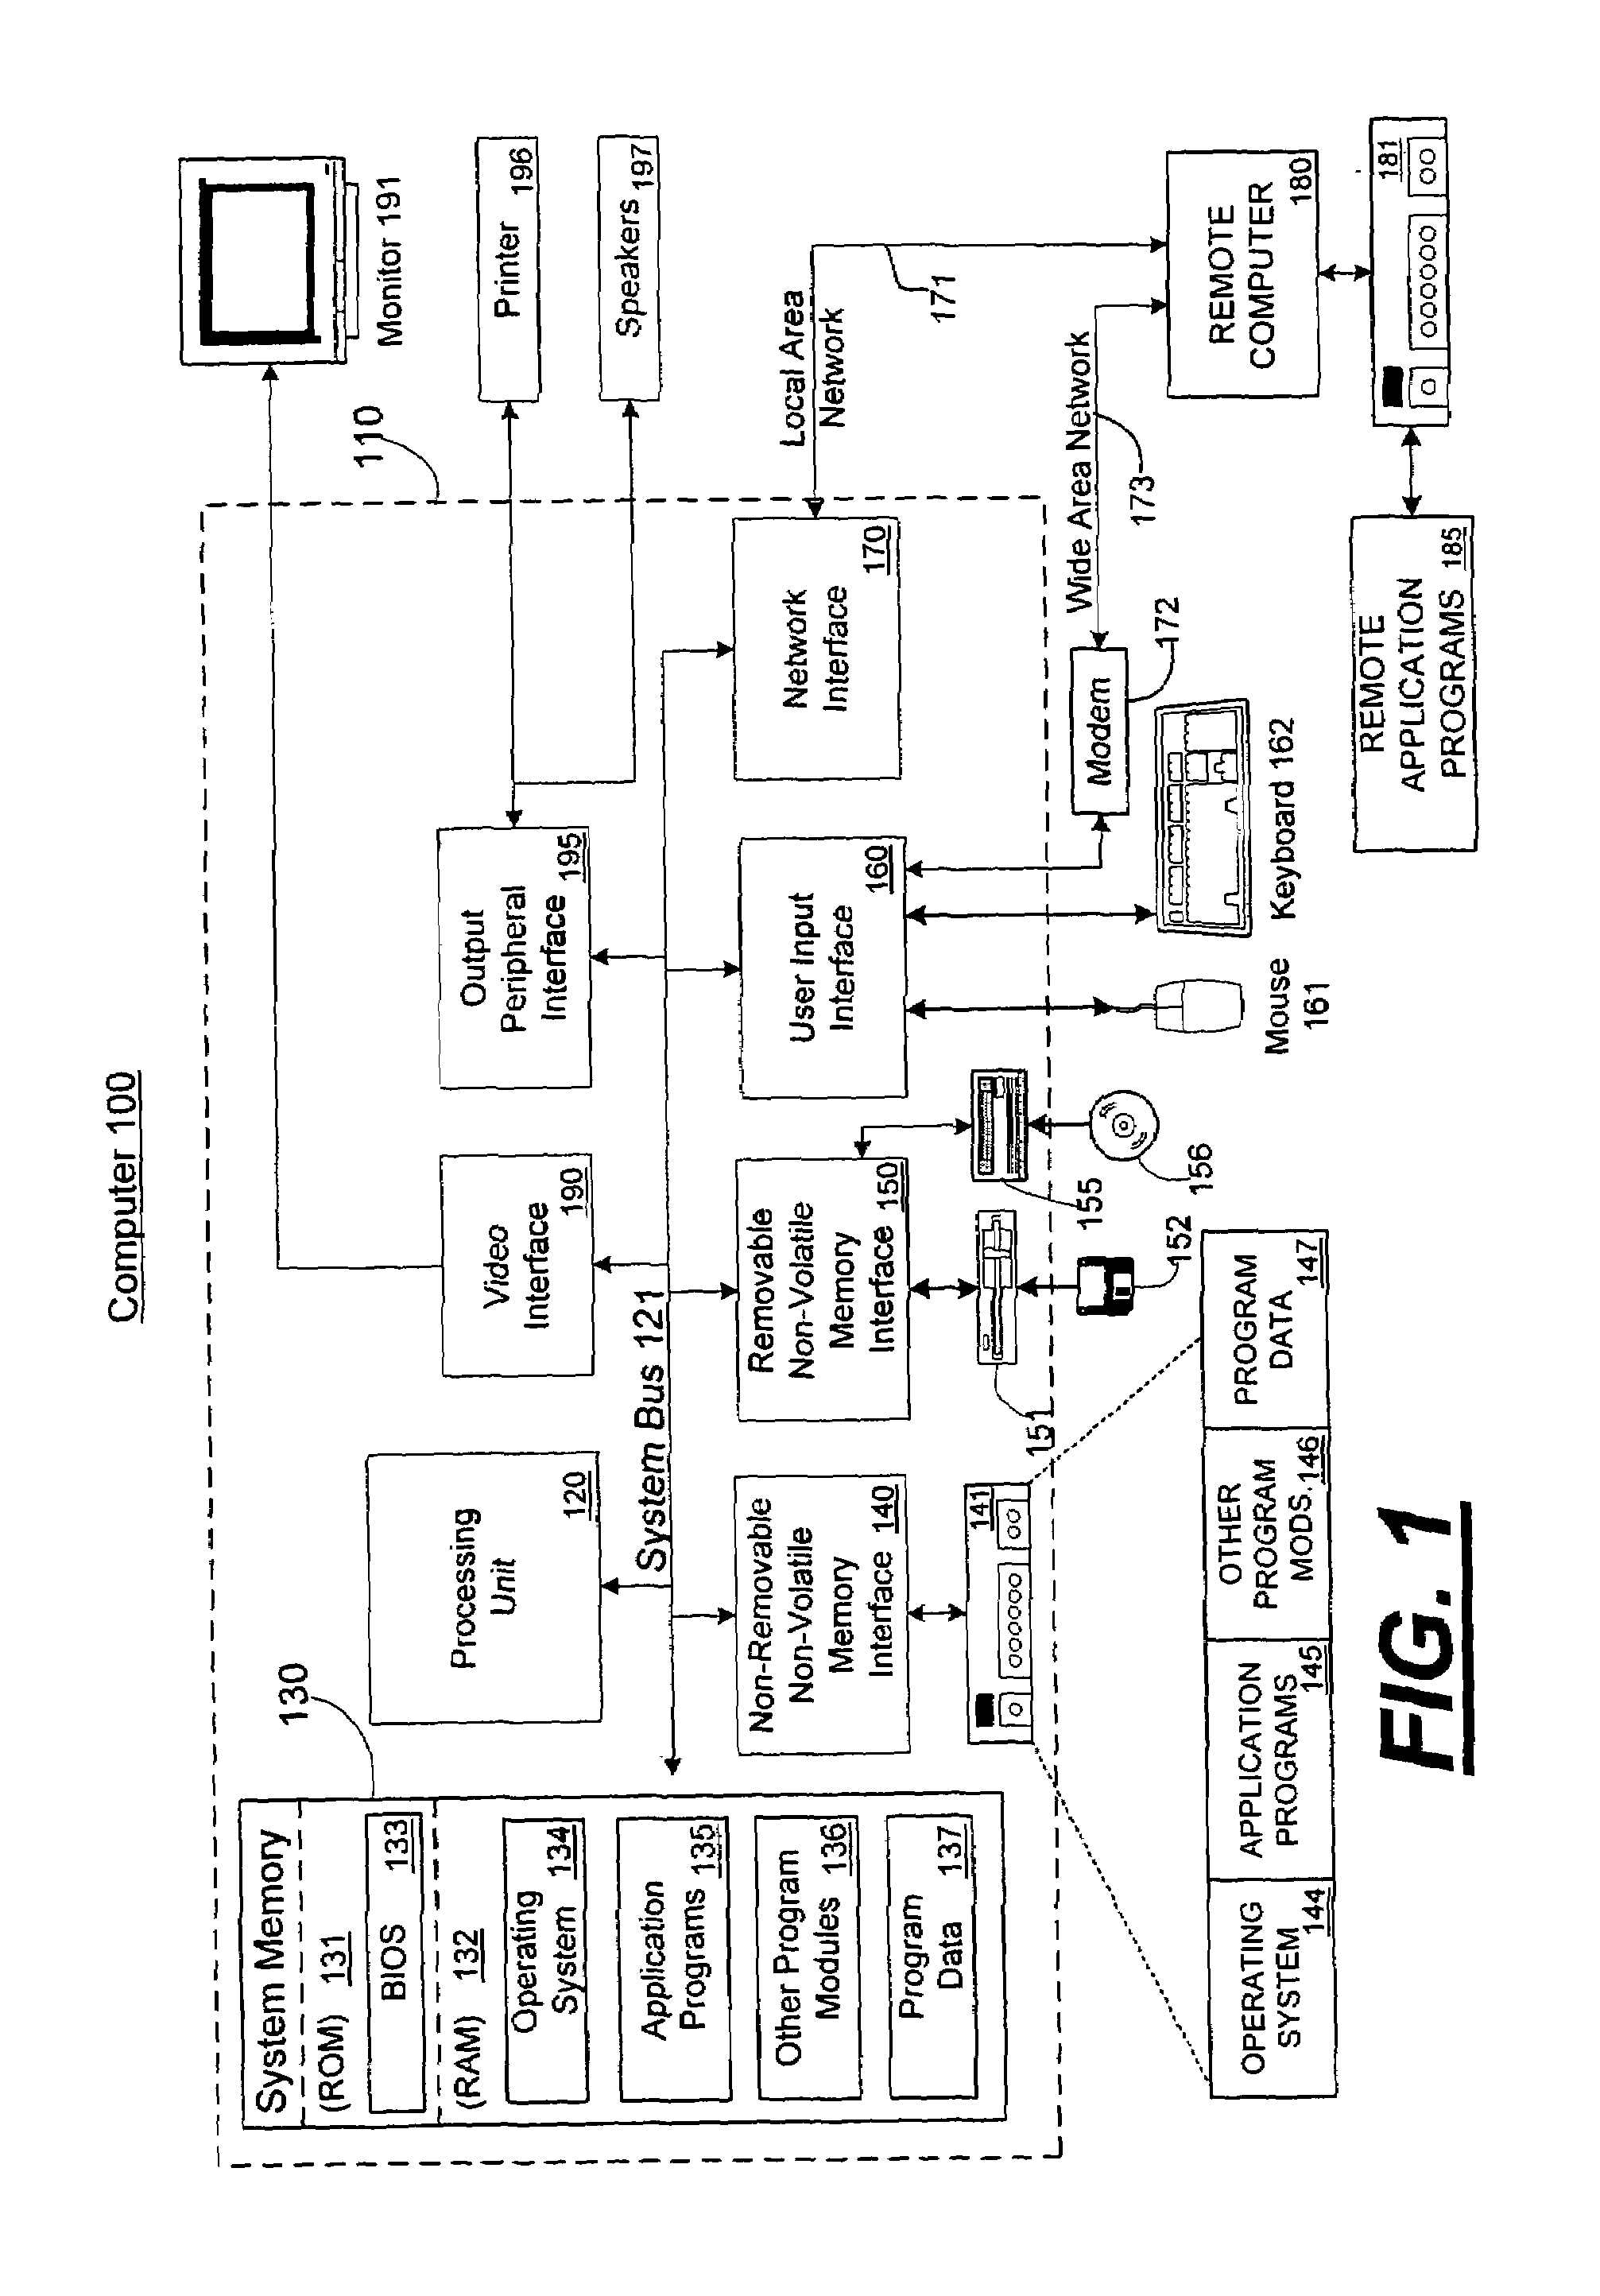 System and method for incremental and reversible data migration and feature deployment